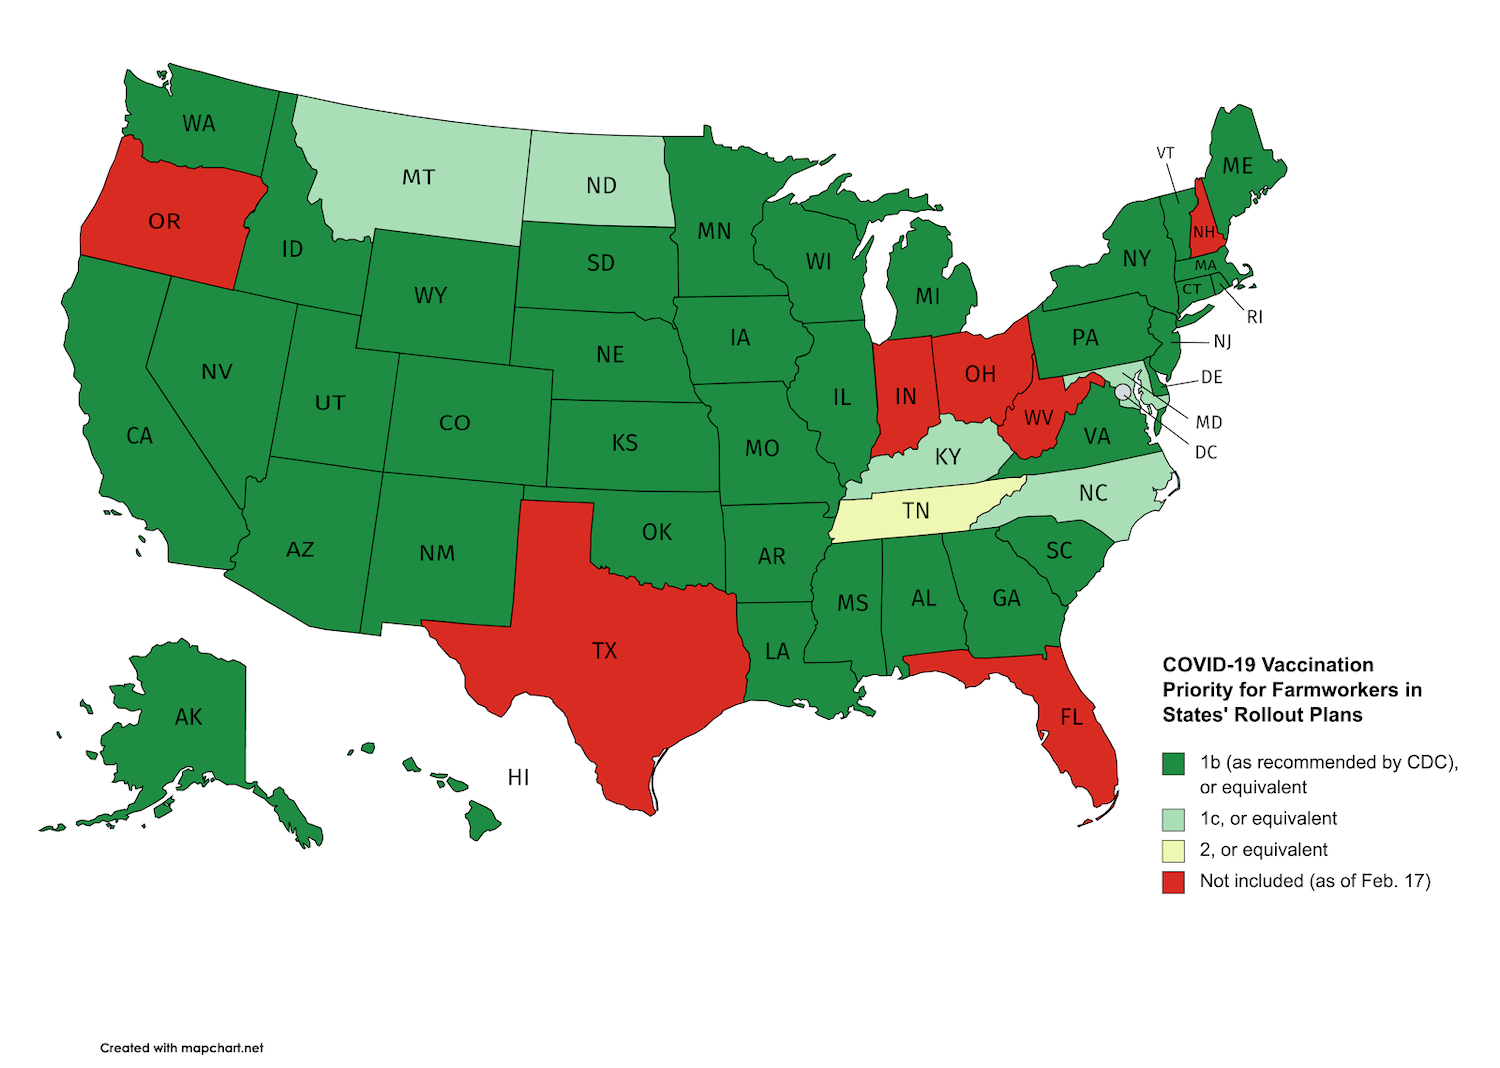 A green and red color-coded map of the United States showing Covid-19 Vaccination priority for farmworkers in States' rollout plans. February 2021